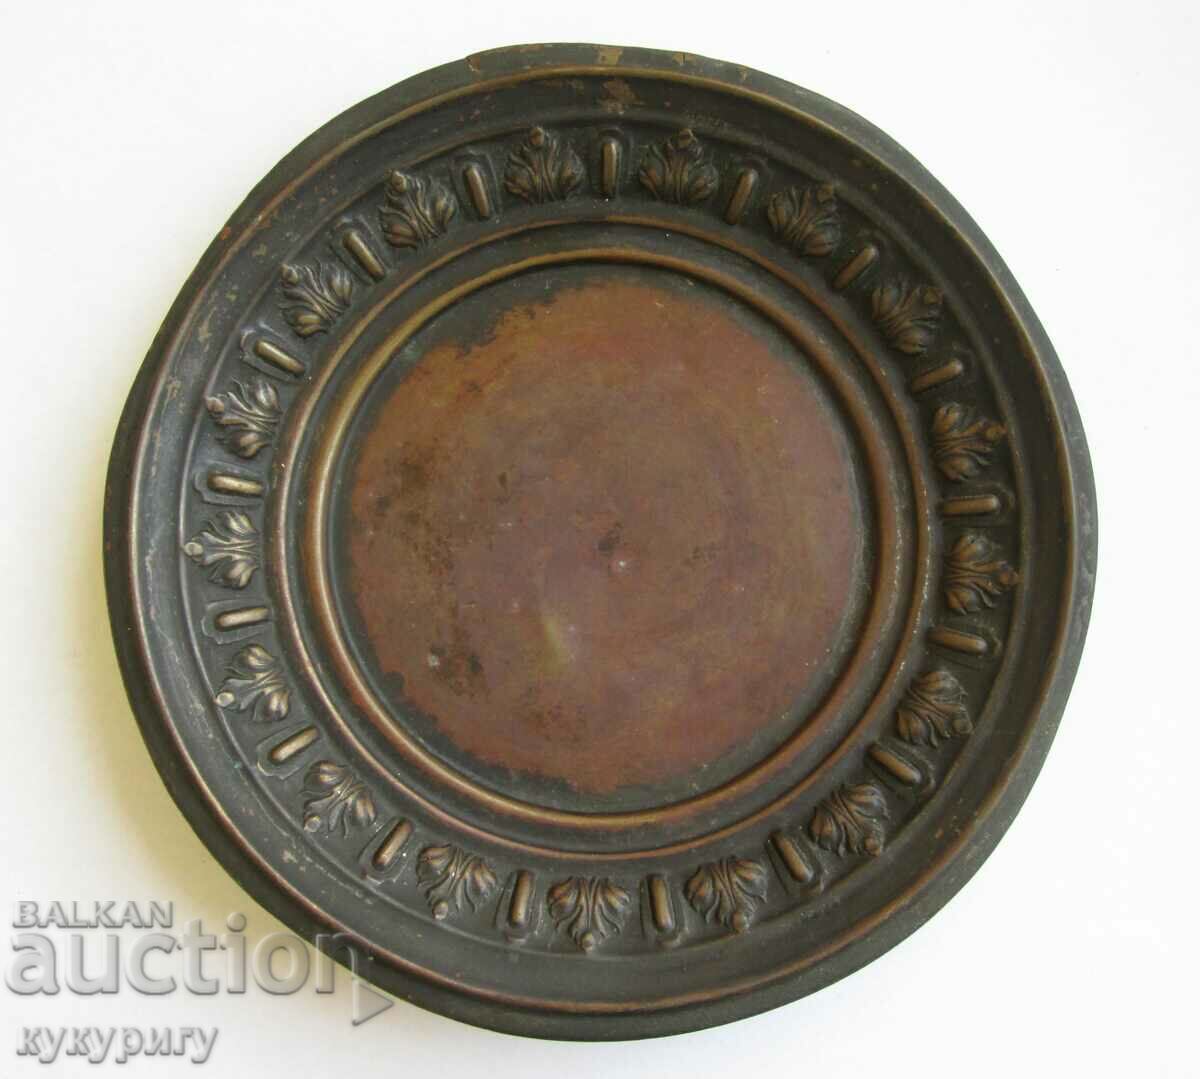 Old 19th century metal plate saucer